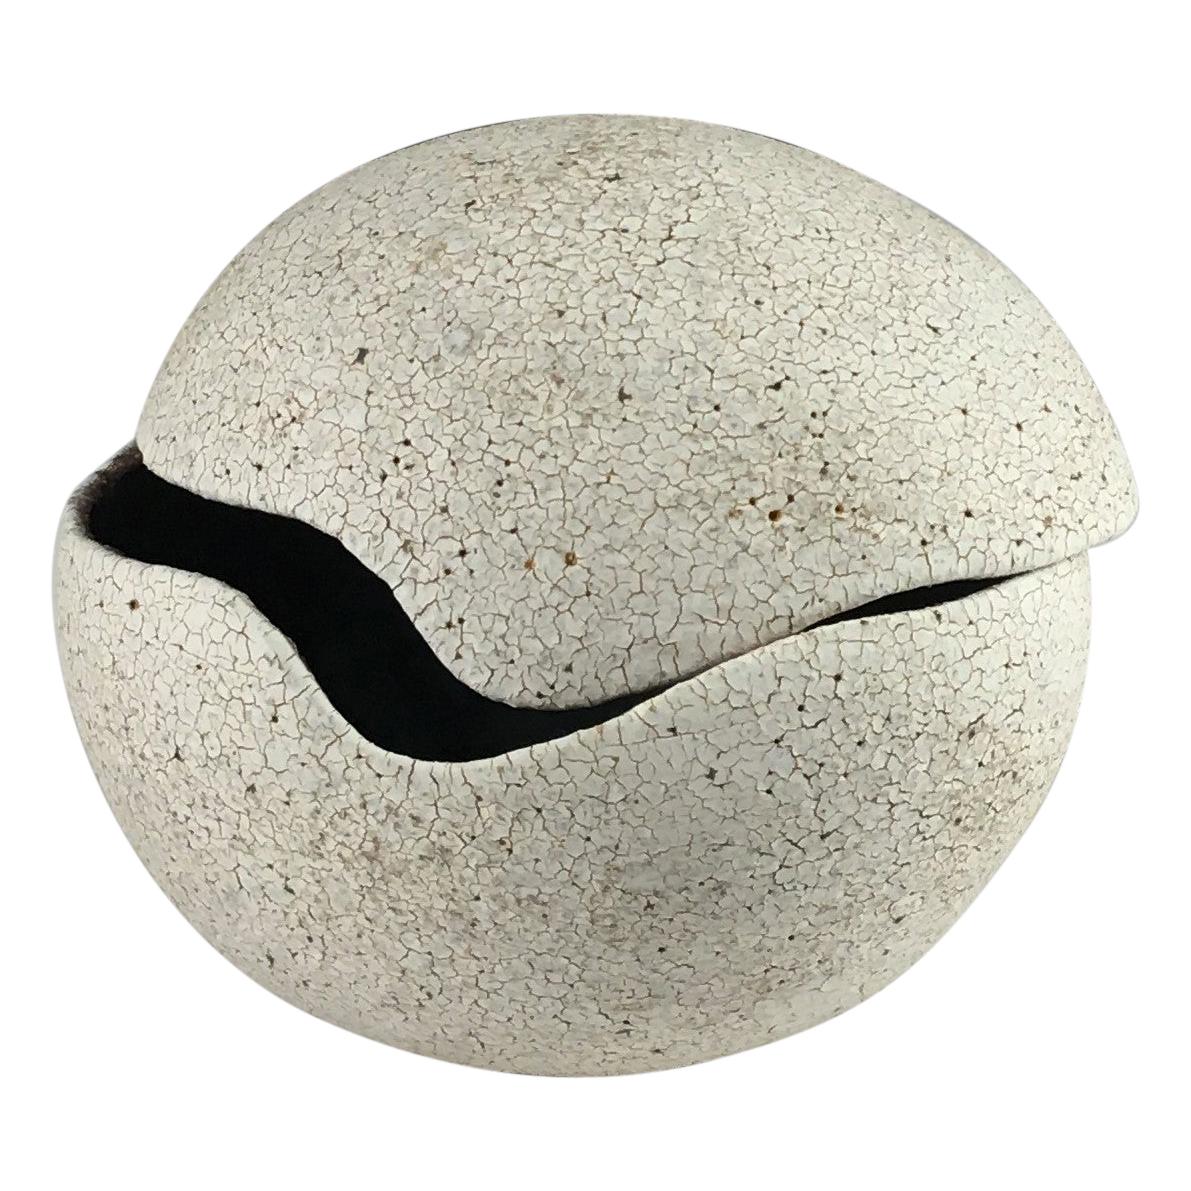 Orb Covered Vessel Pottery by Yumiko Kuga